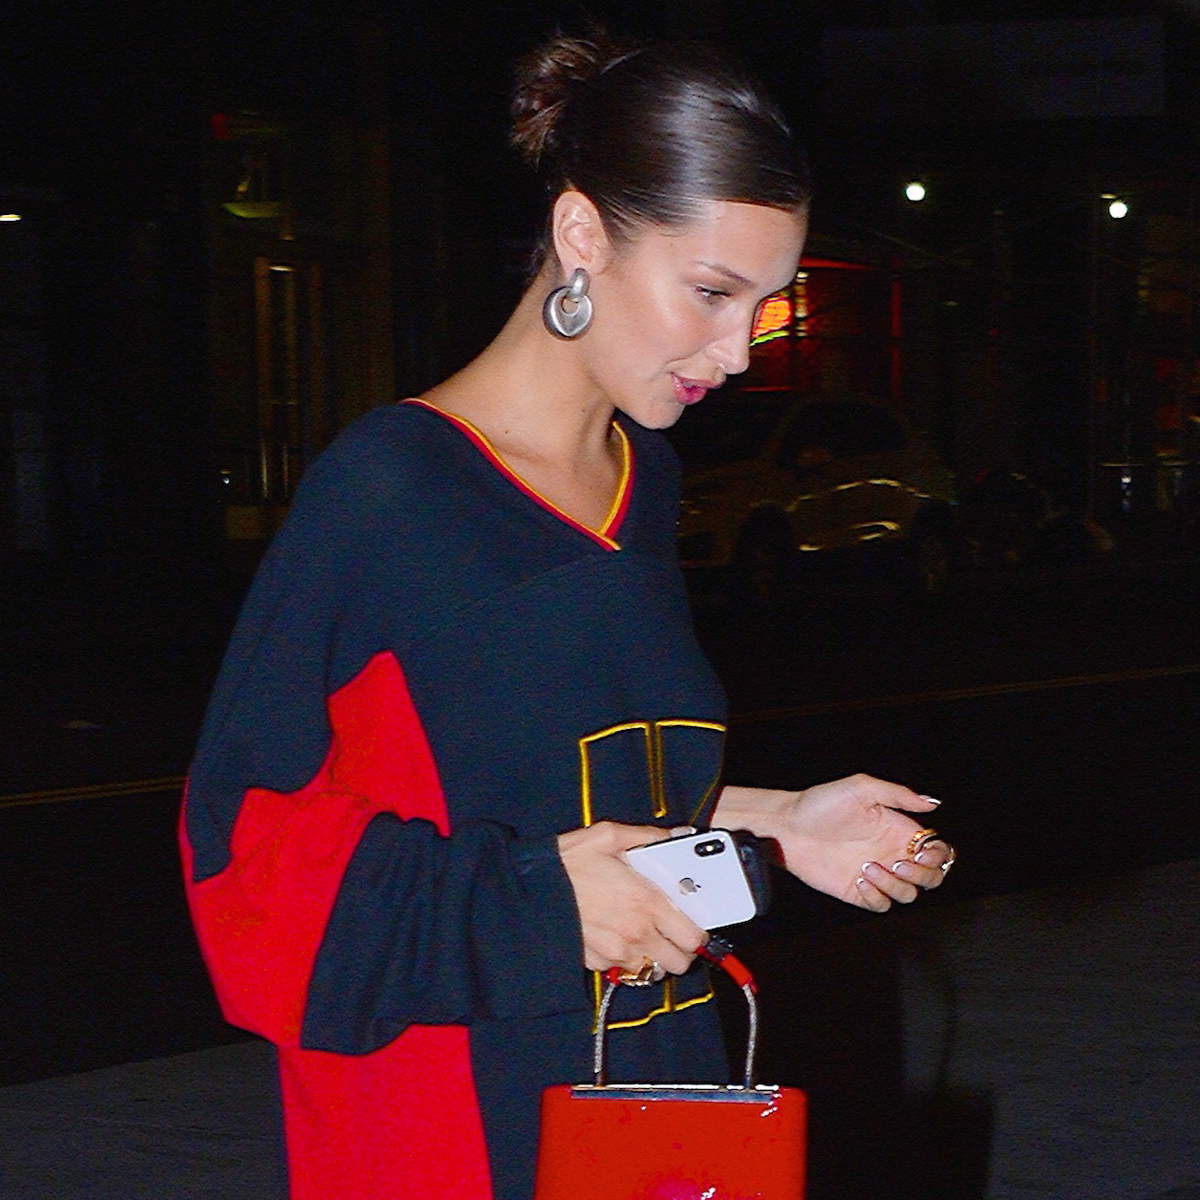 22 Reasons Bella Hadid's Style Is the Coolest